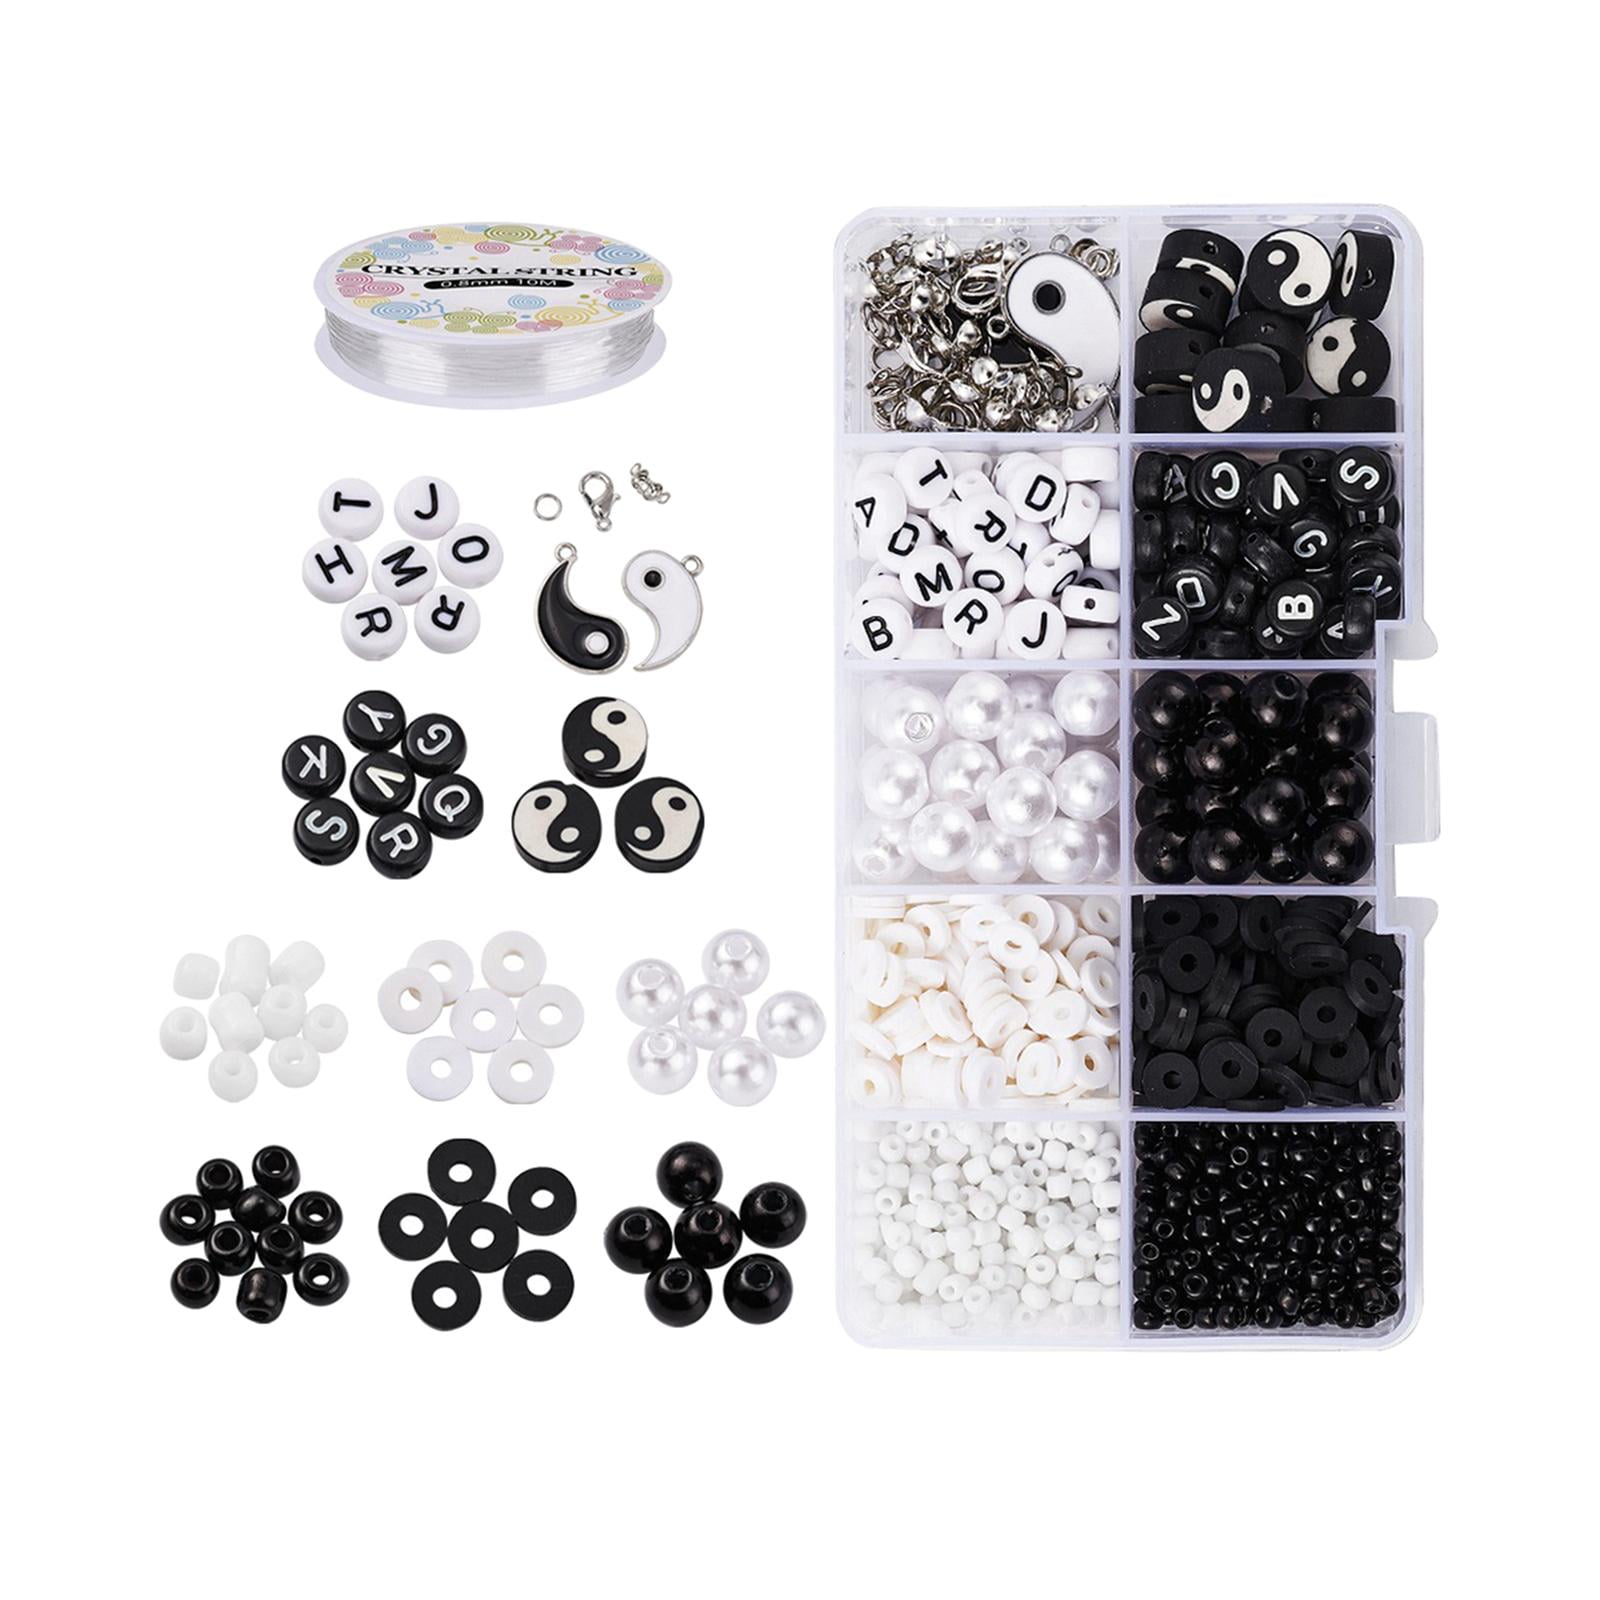 YIJU Polymer Clay Bead Set, Jewelry Making Accessories, Black and White Charms, Spacer Beads for Bracelet Rings Earrings Chains 898Pcs, Adult Unisex, Size